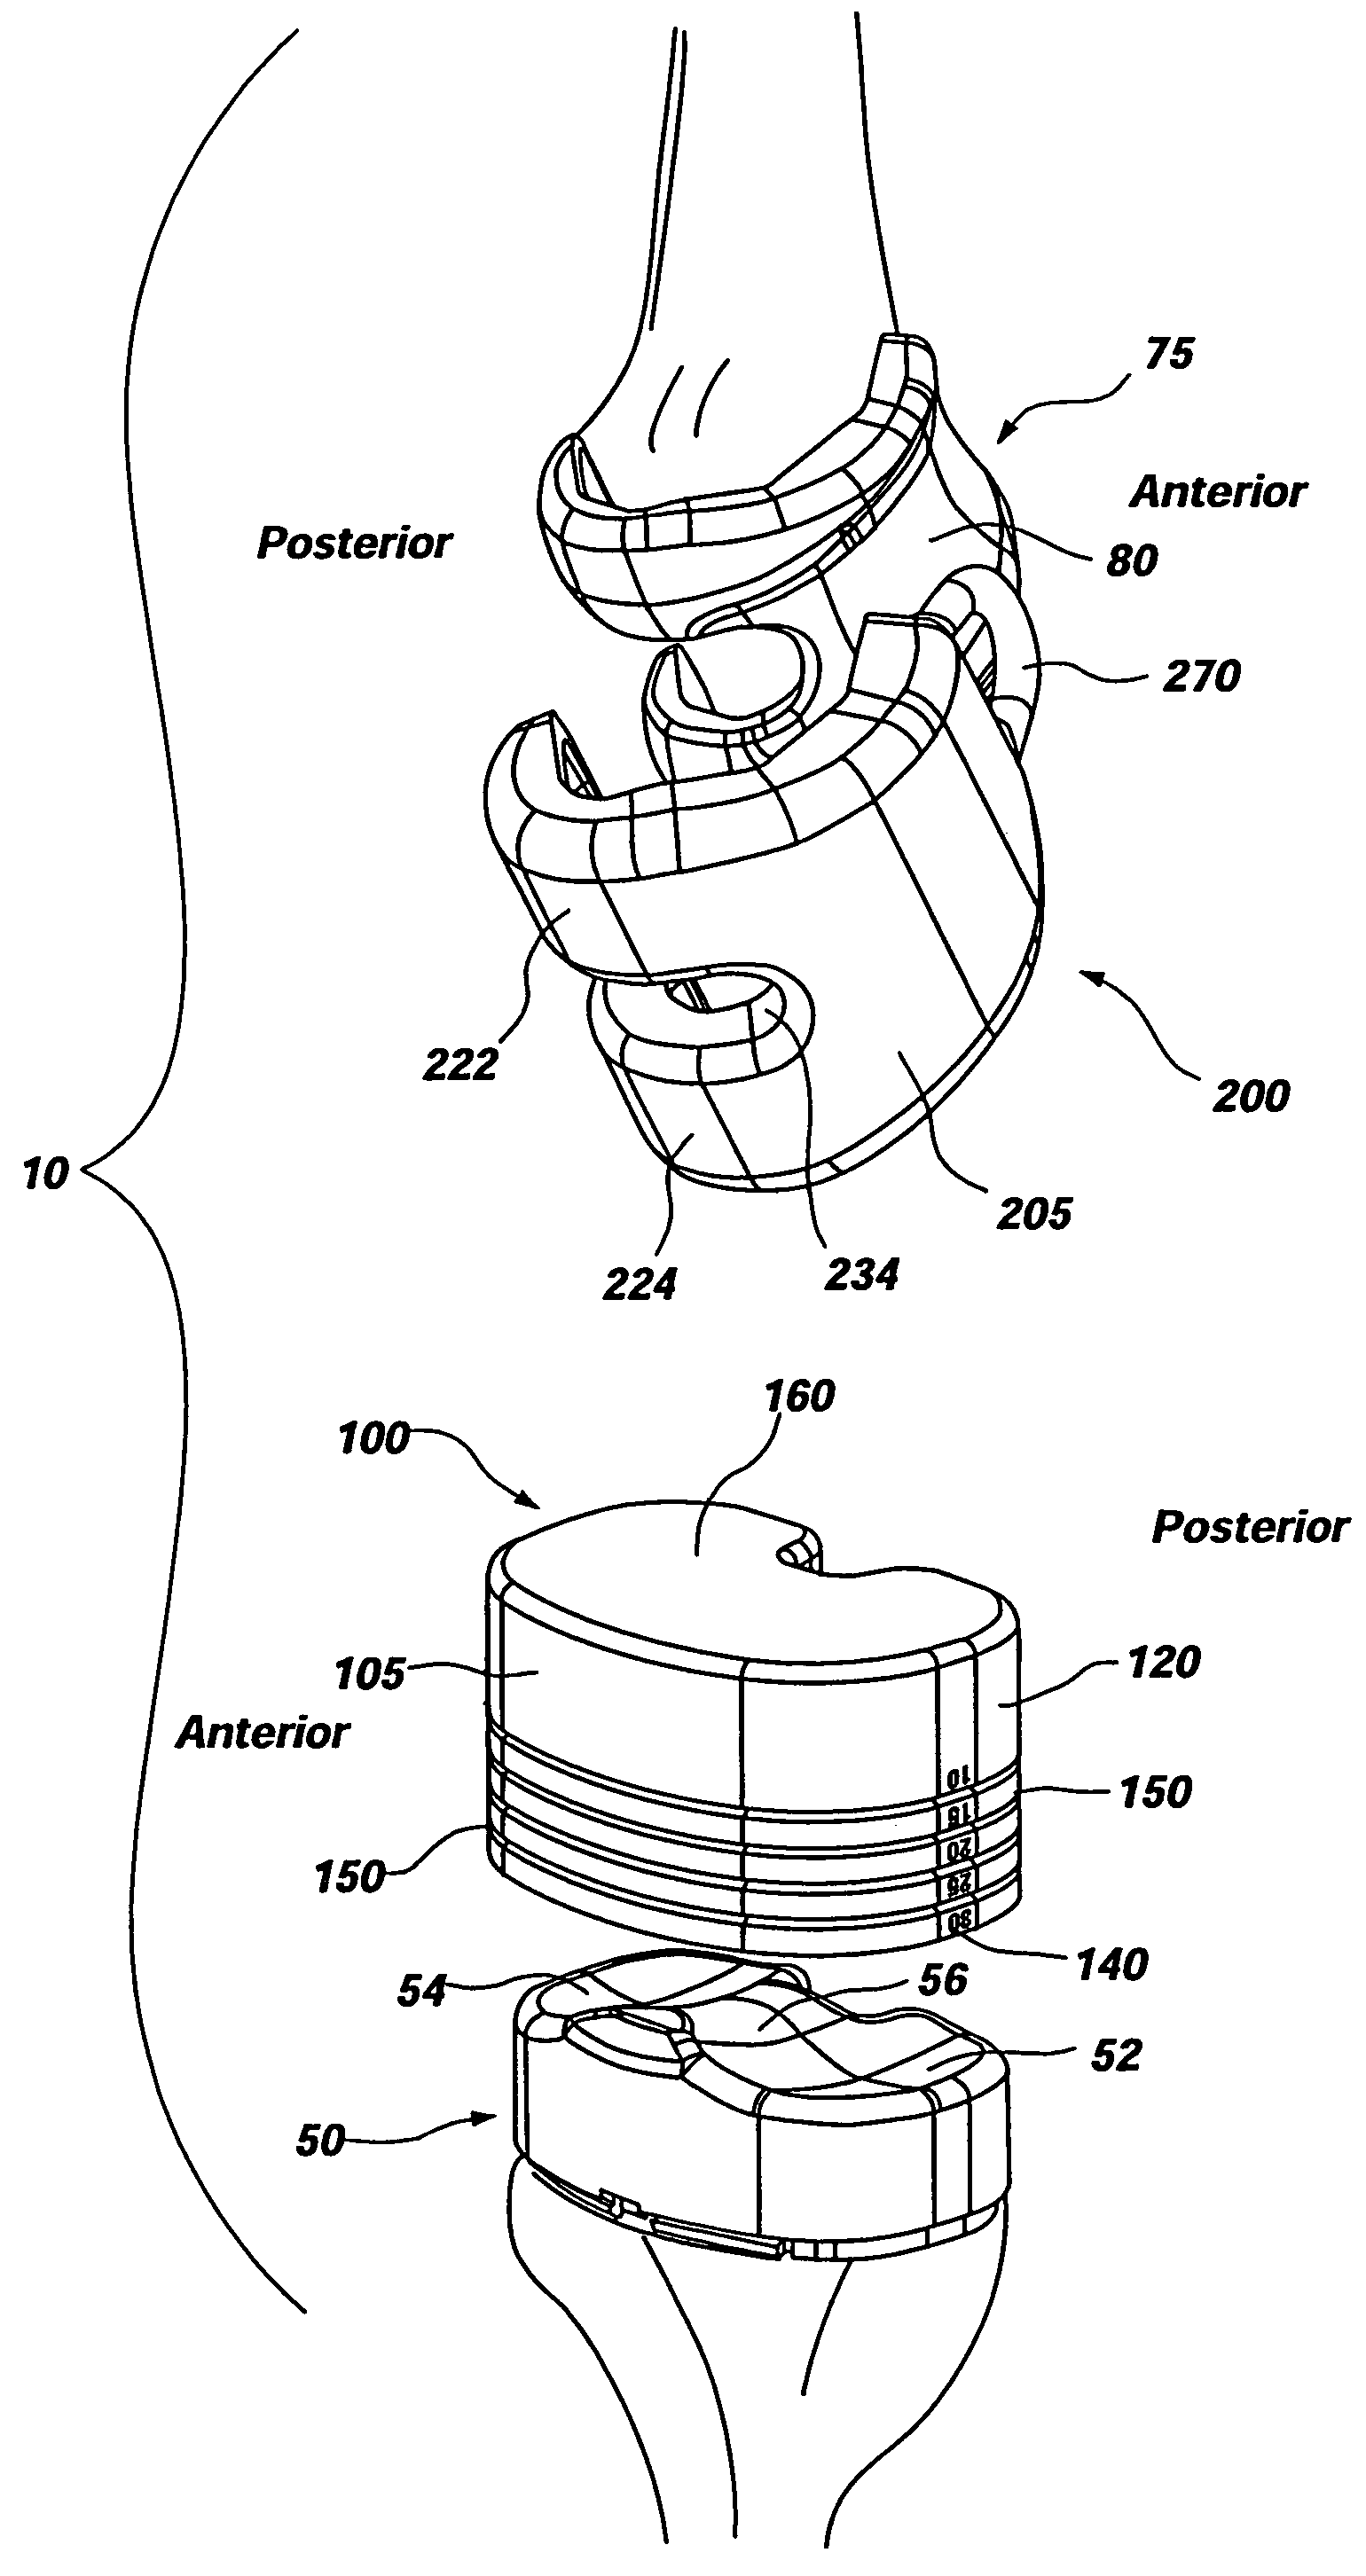 Method of forming a temporary prosthetic joint using a disposable mold